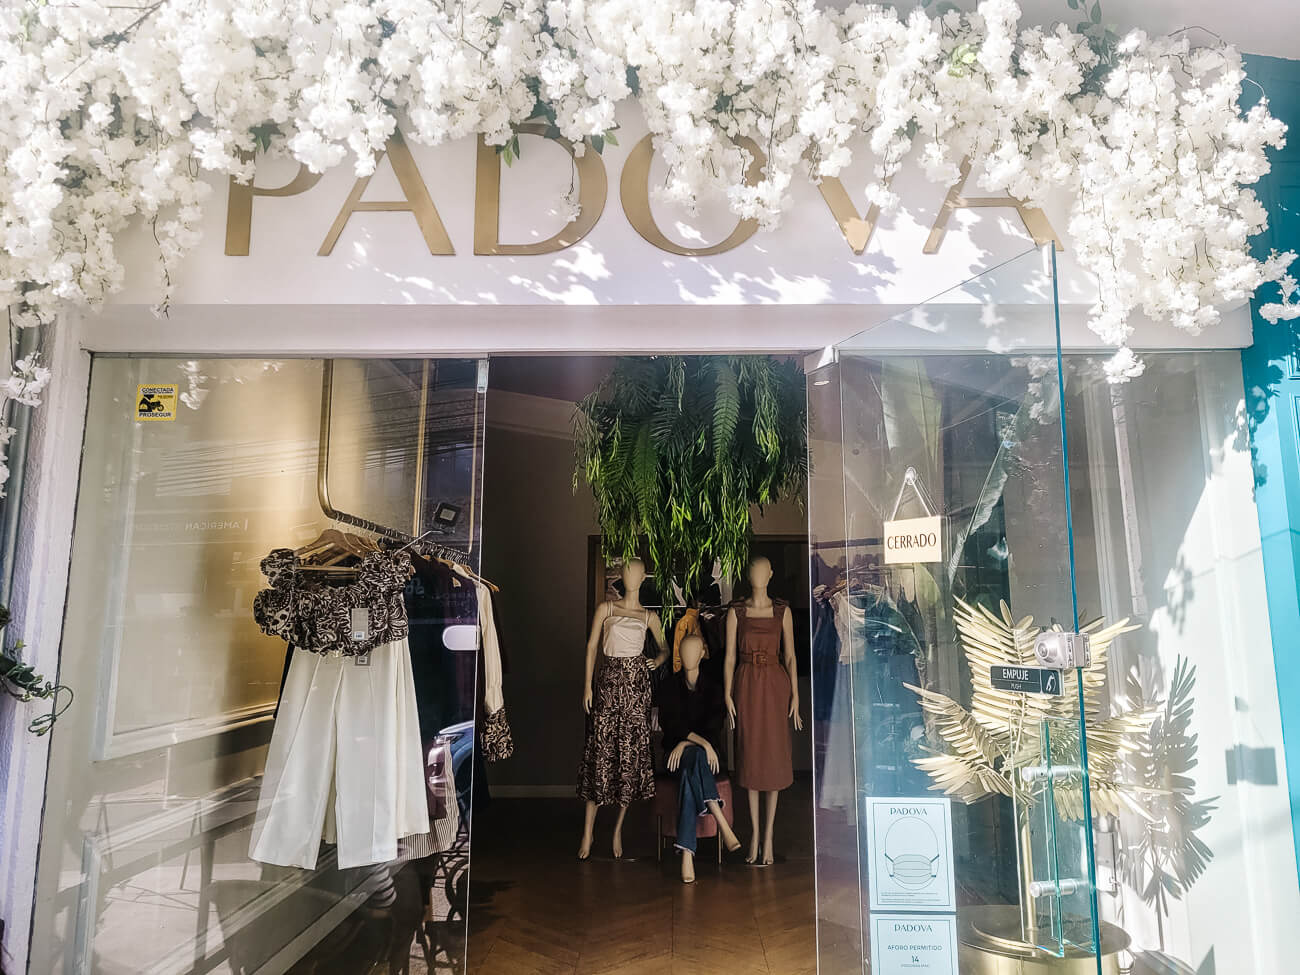 Padova, high end boutique store in Zona T in Bogota Colombia